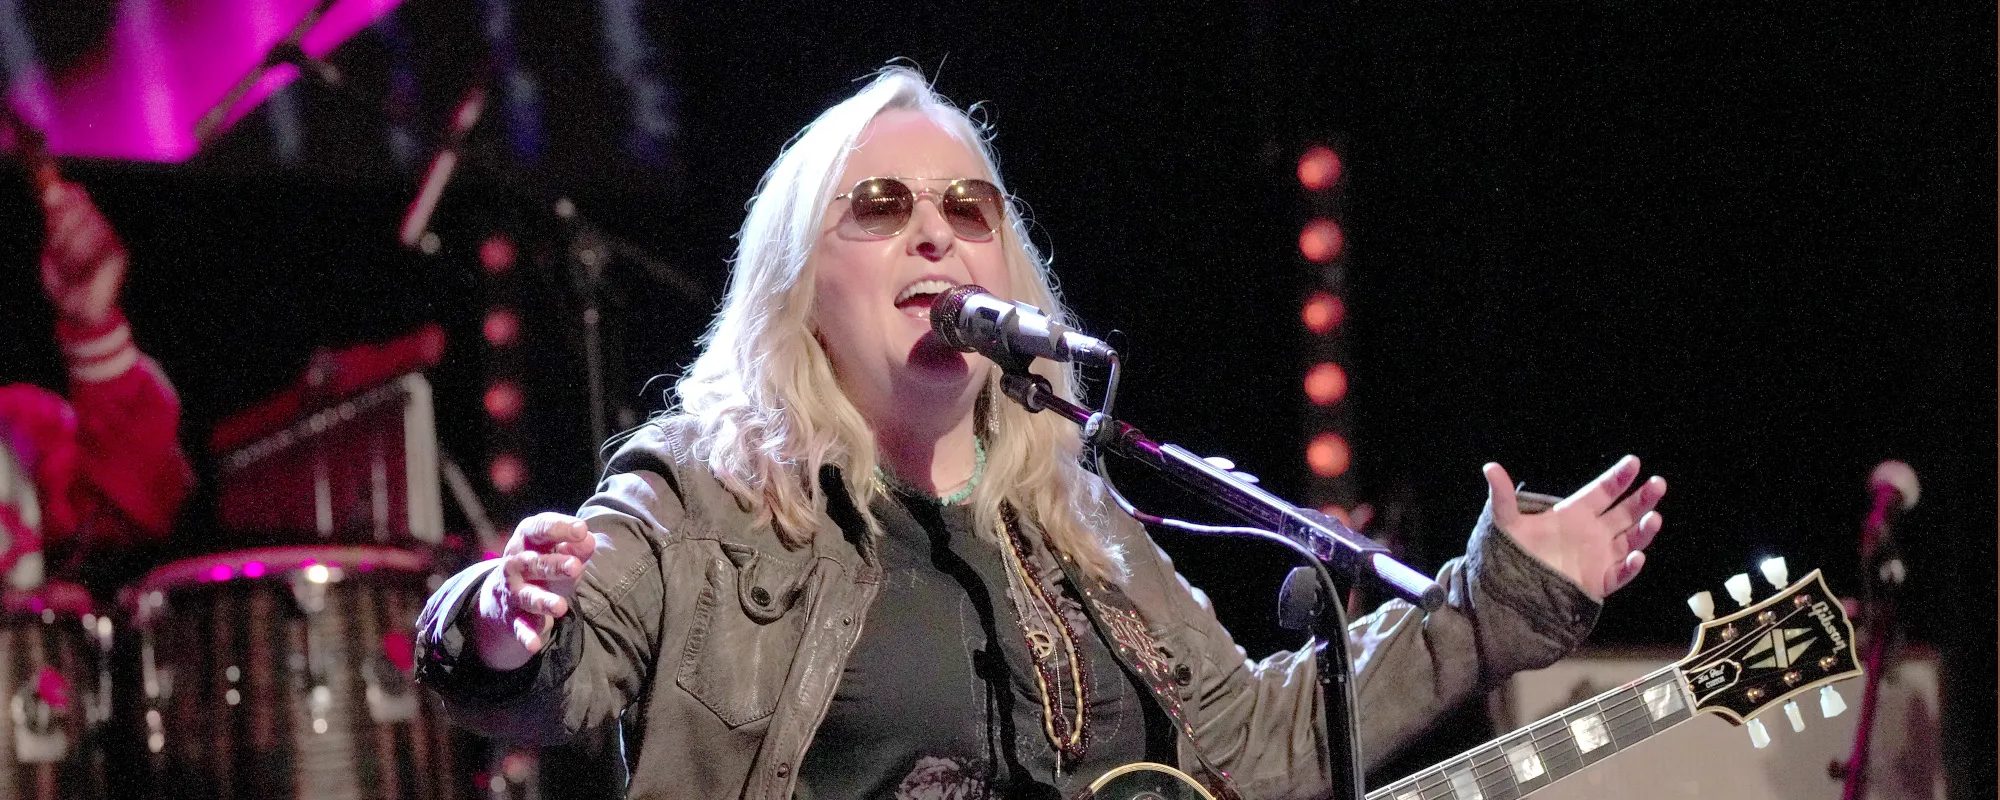 The Meaning Behind Melissa Etheridge’s Pleading Ballad “Come To My Window”